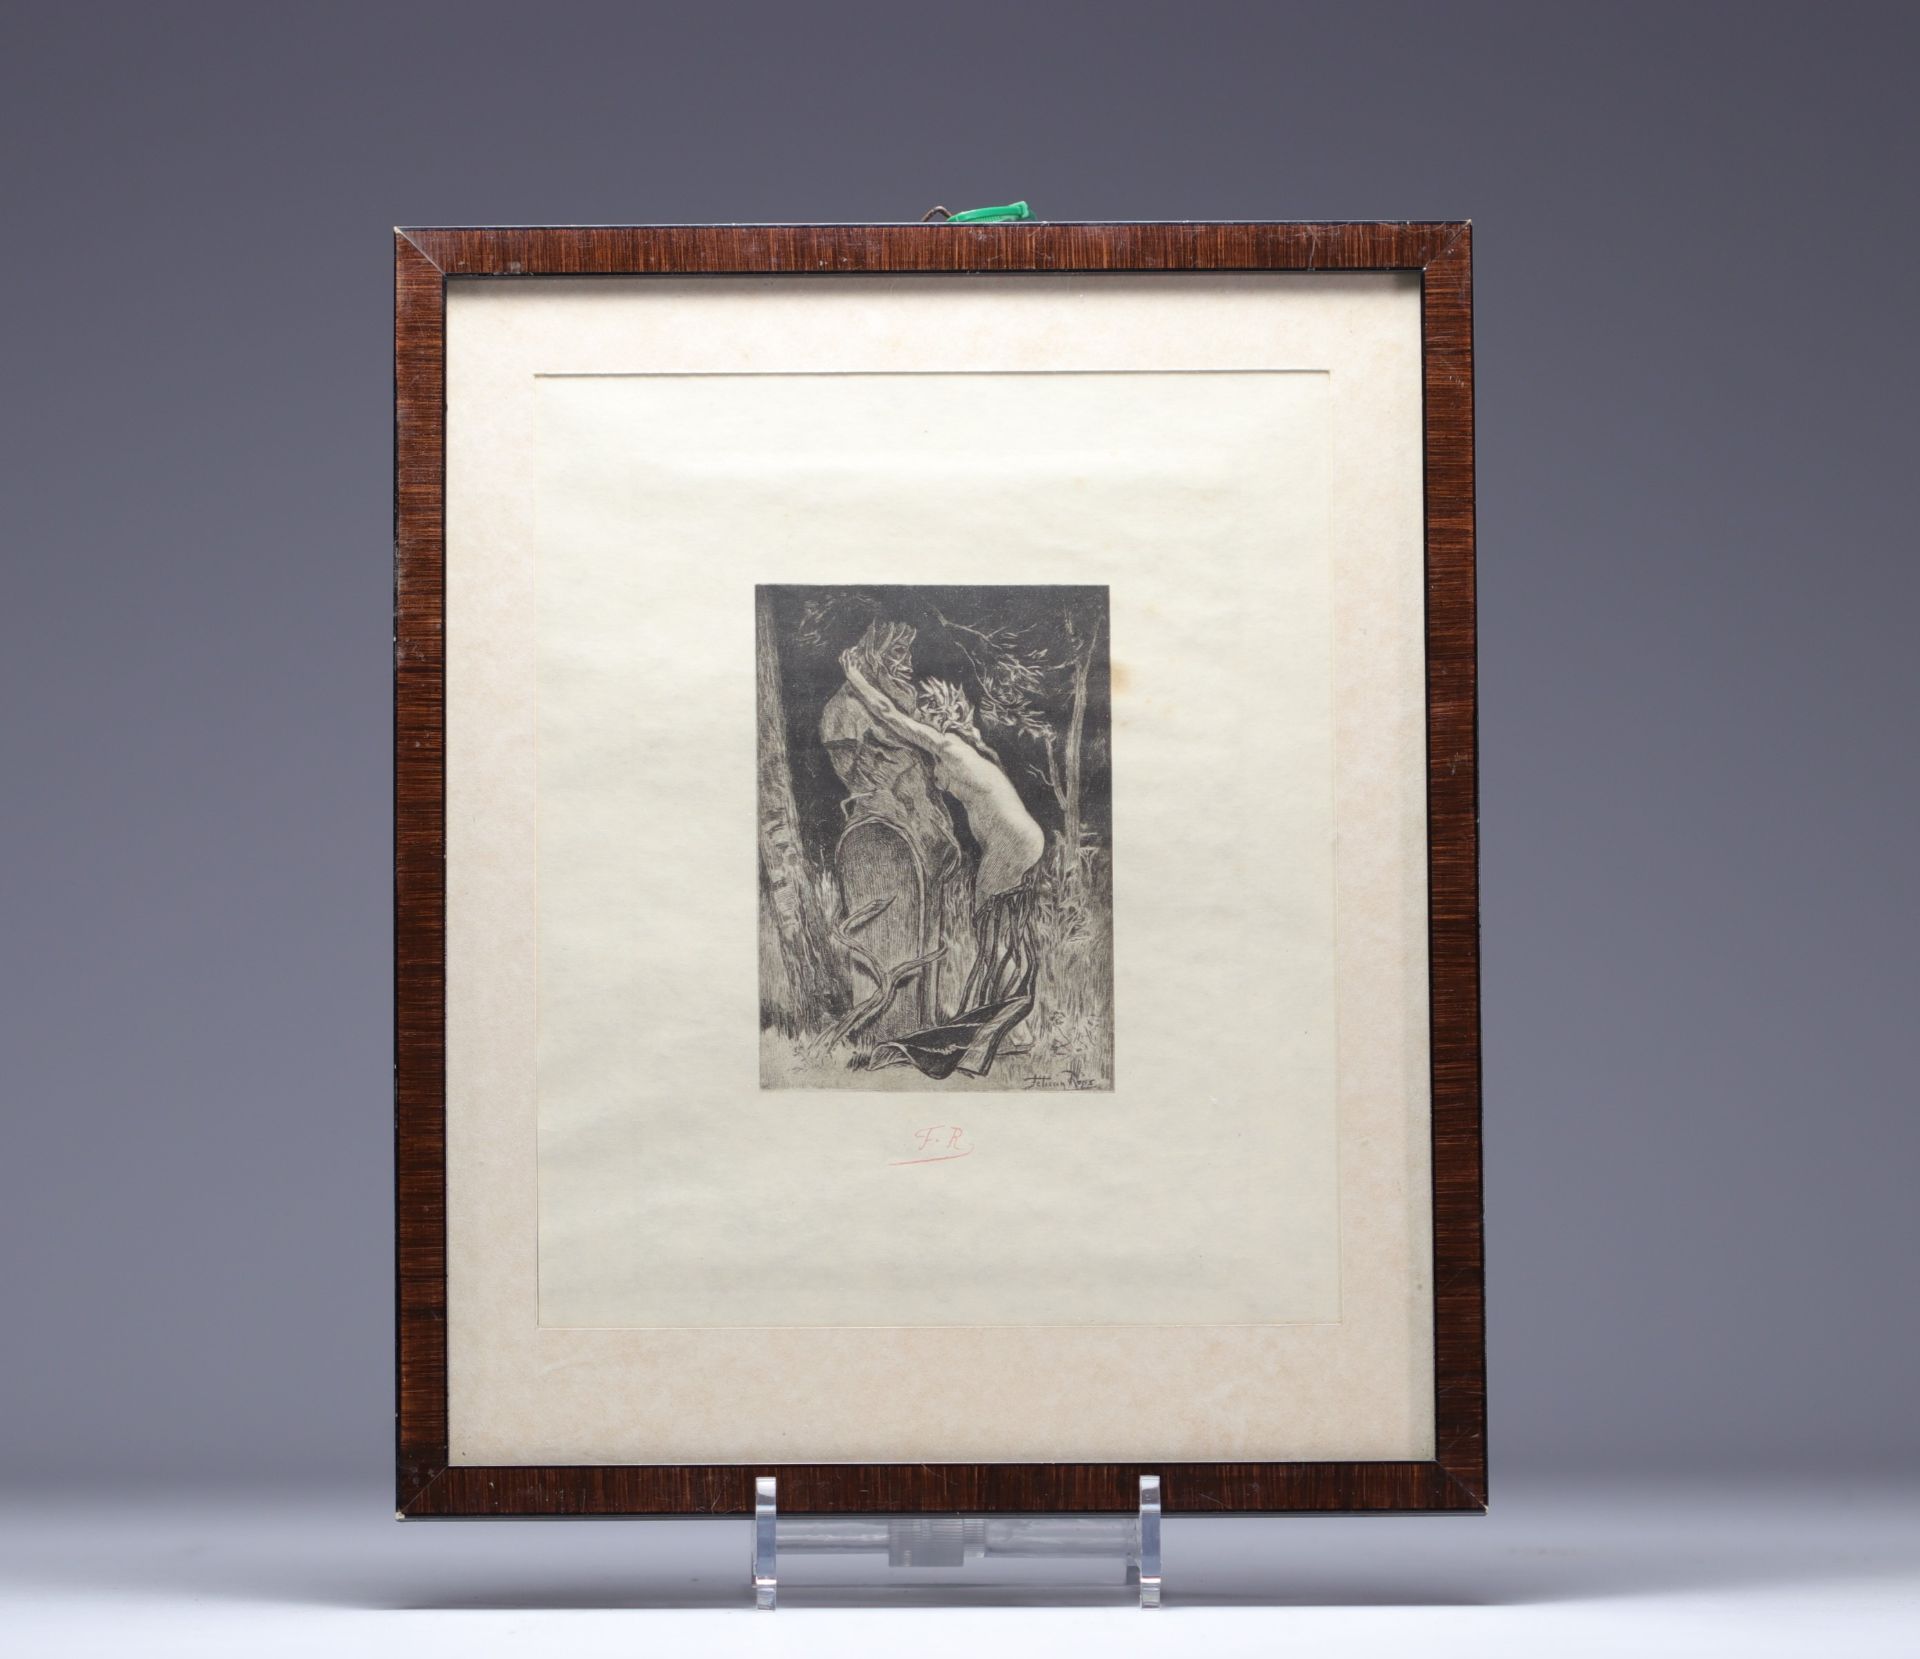 Felicien ROPS (1833-1898) â€˜Hommage a Panâ€™ Etching, signed in the plate and monogrammed. - Image 2 of 2